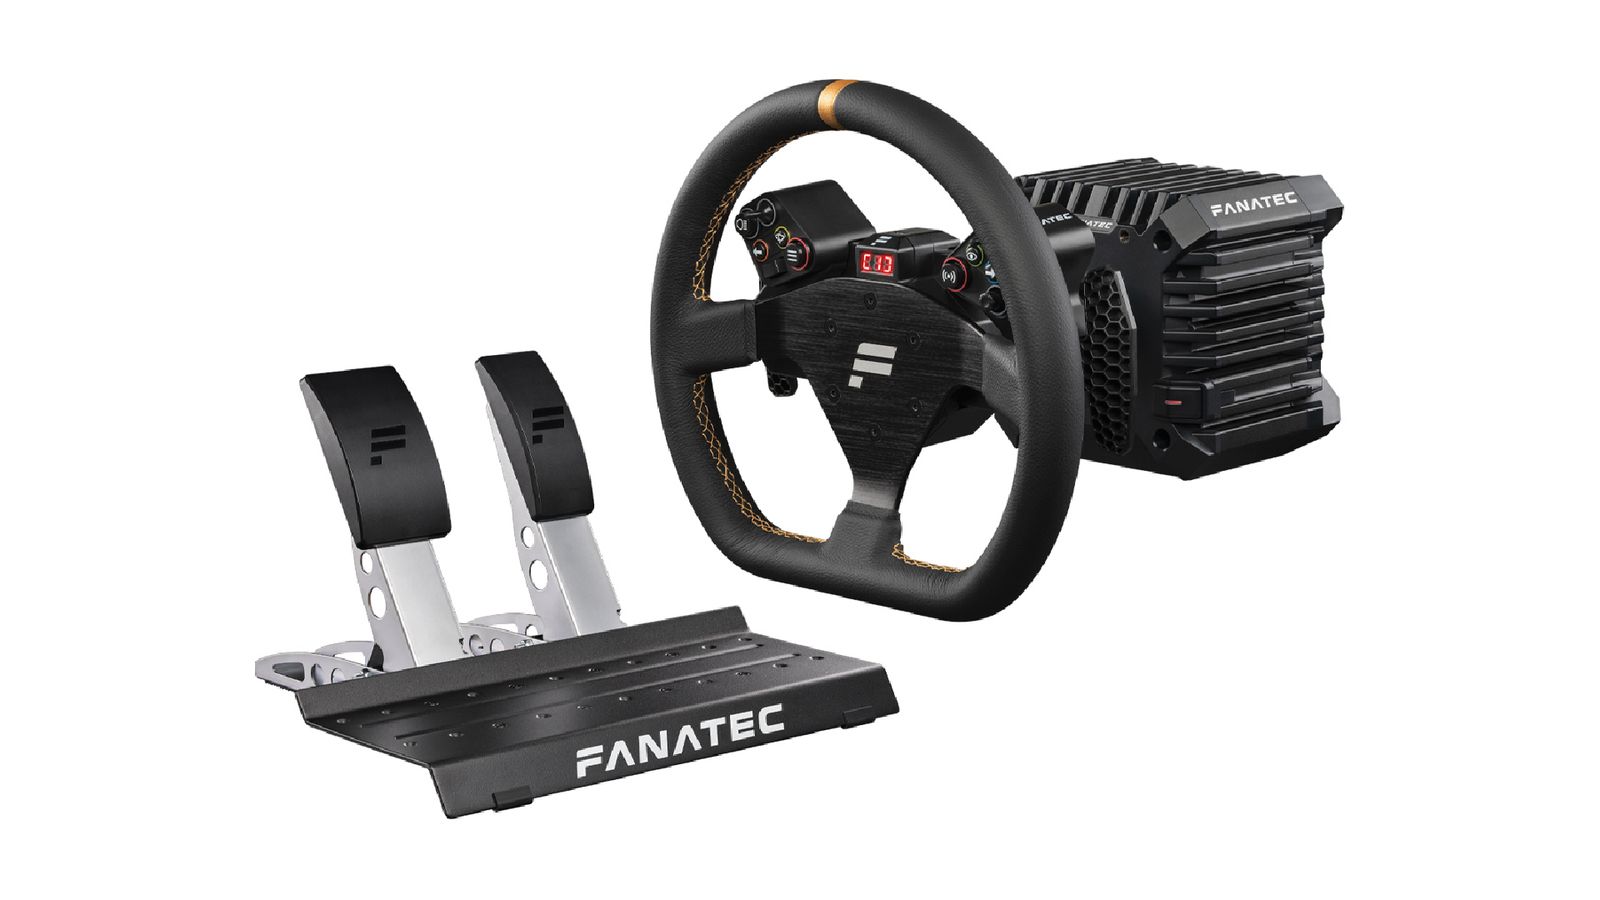 Fanatec CSL DD Ready2Race R300 Bundle product image of a black racing wheel attached to a large wheel base, all of which next to a silver and black set of pedals.